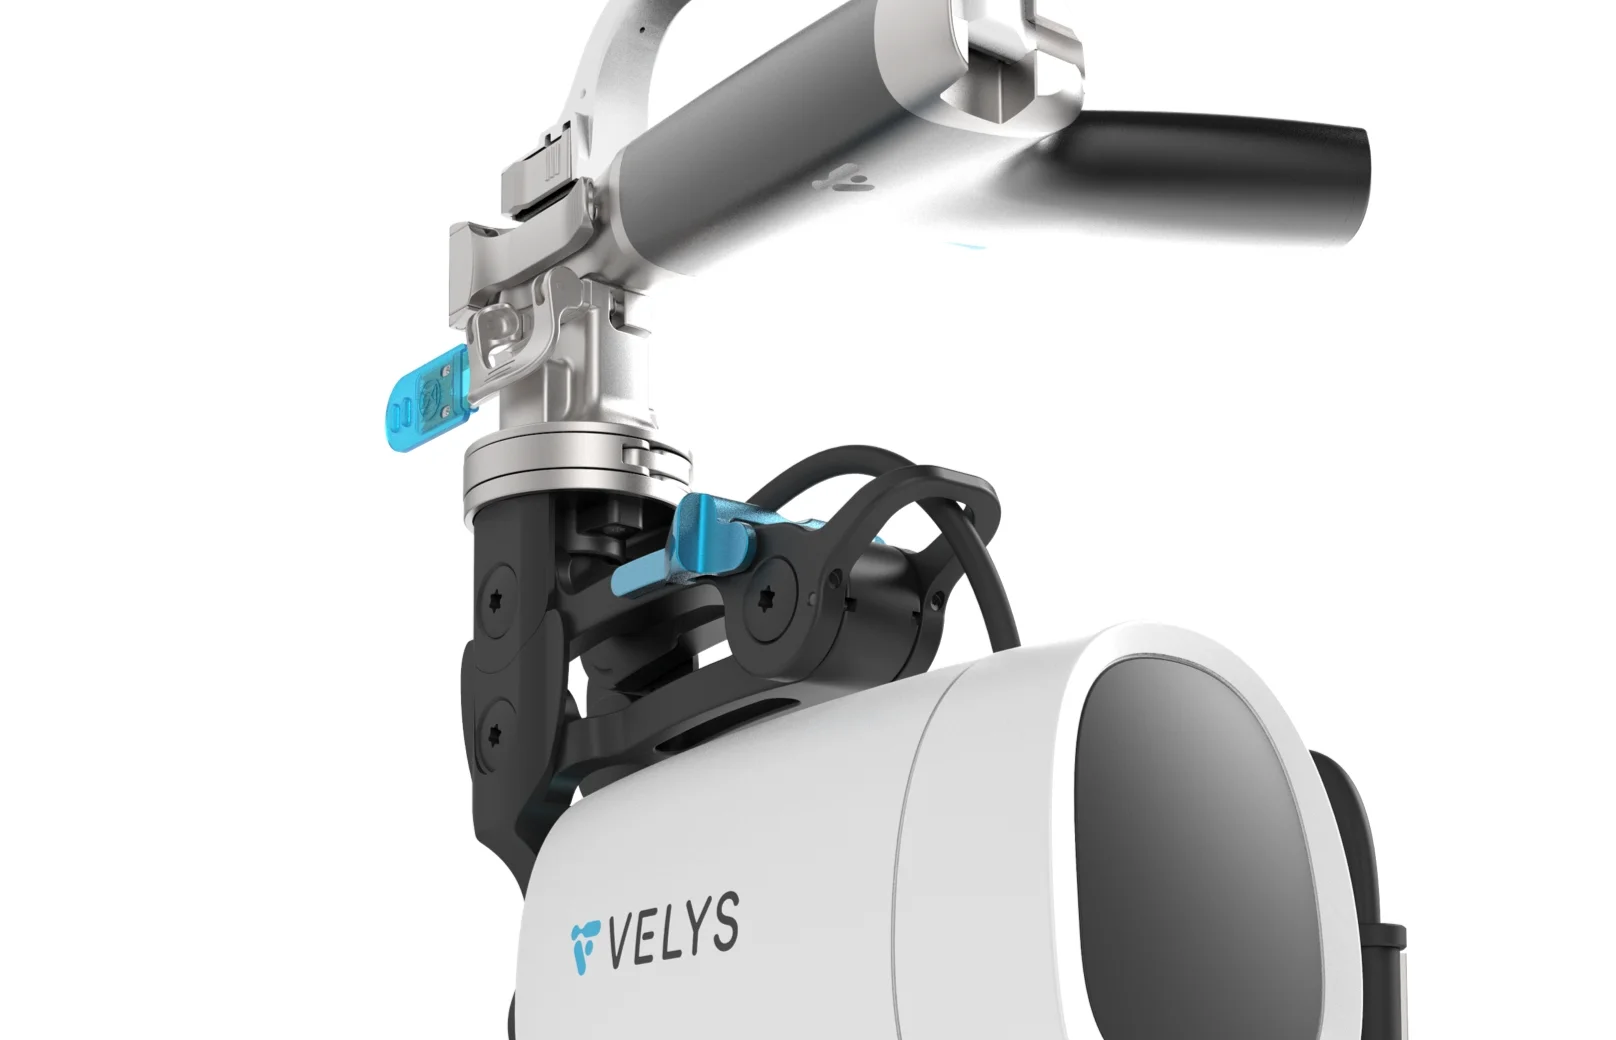 Close up of the VELYSTM Robotic Assisted Solution on a white background.